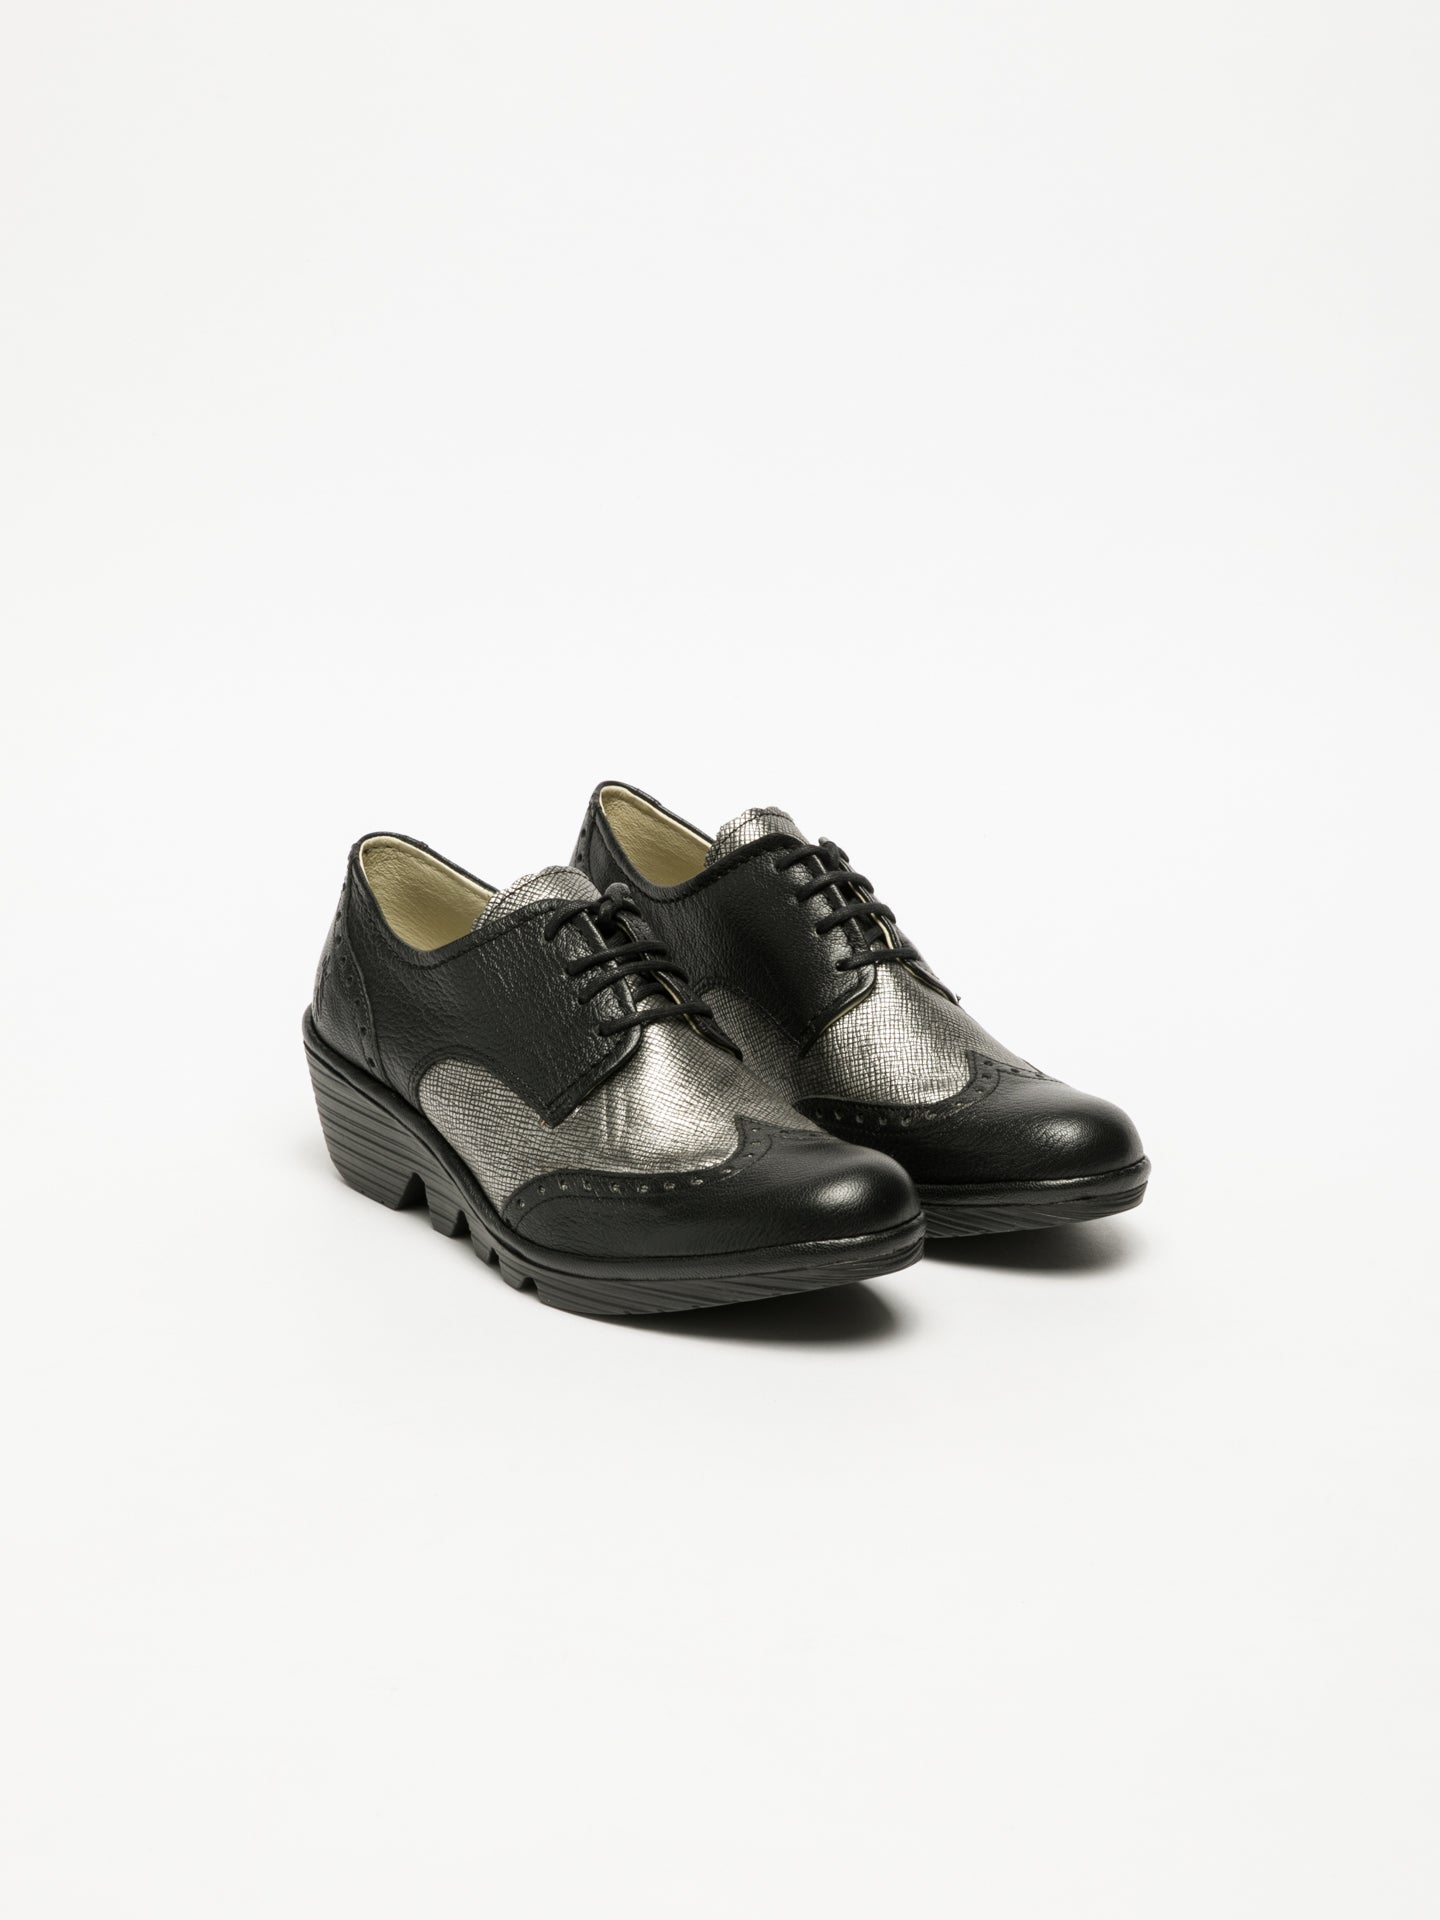 Fly London Coal Black Derby Shoes